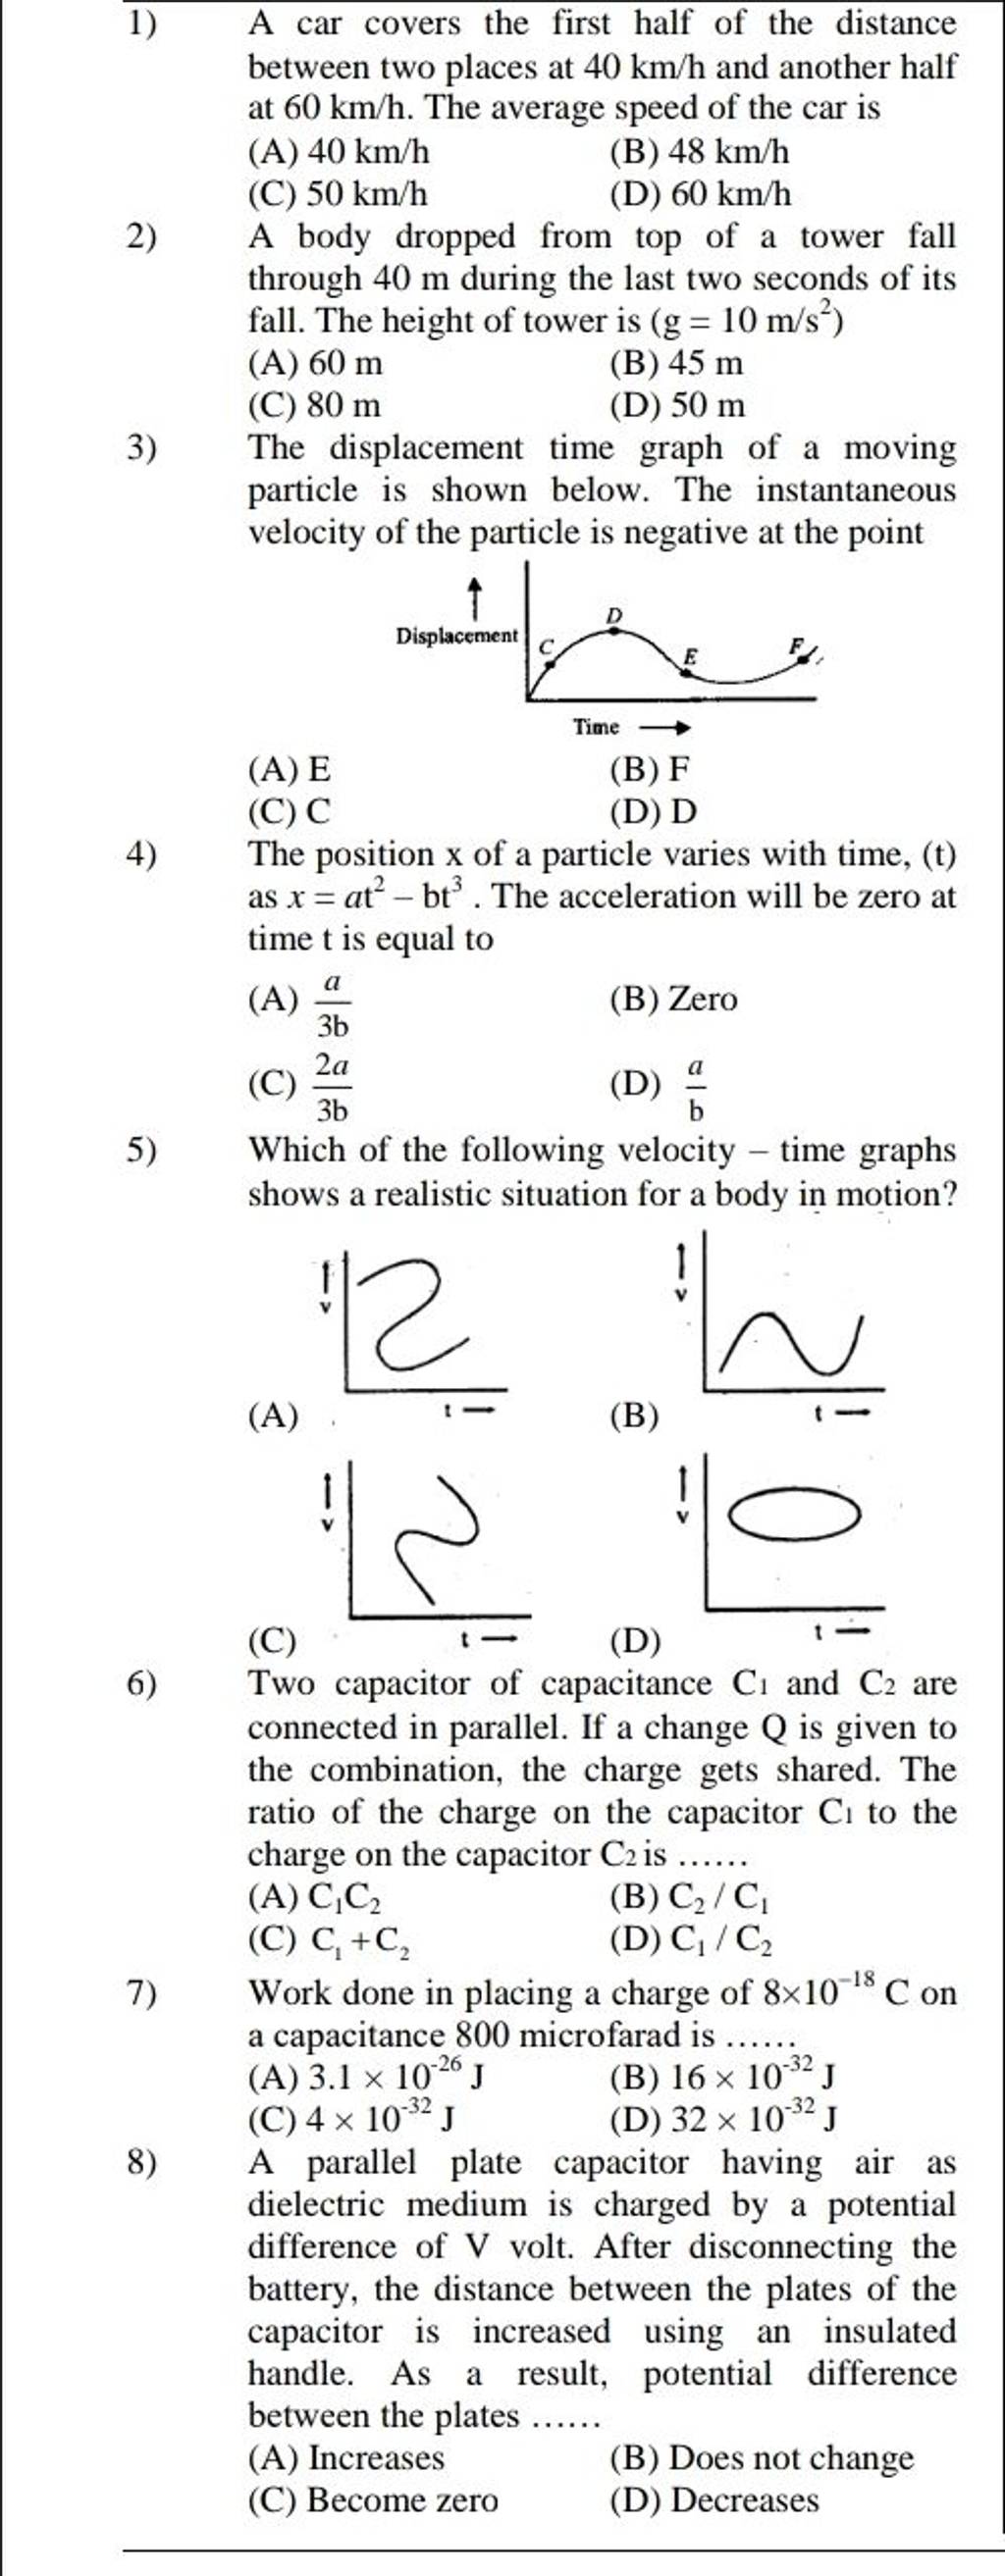  Which of the following velocity - time graphs shows a realistic situa